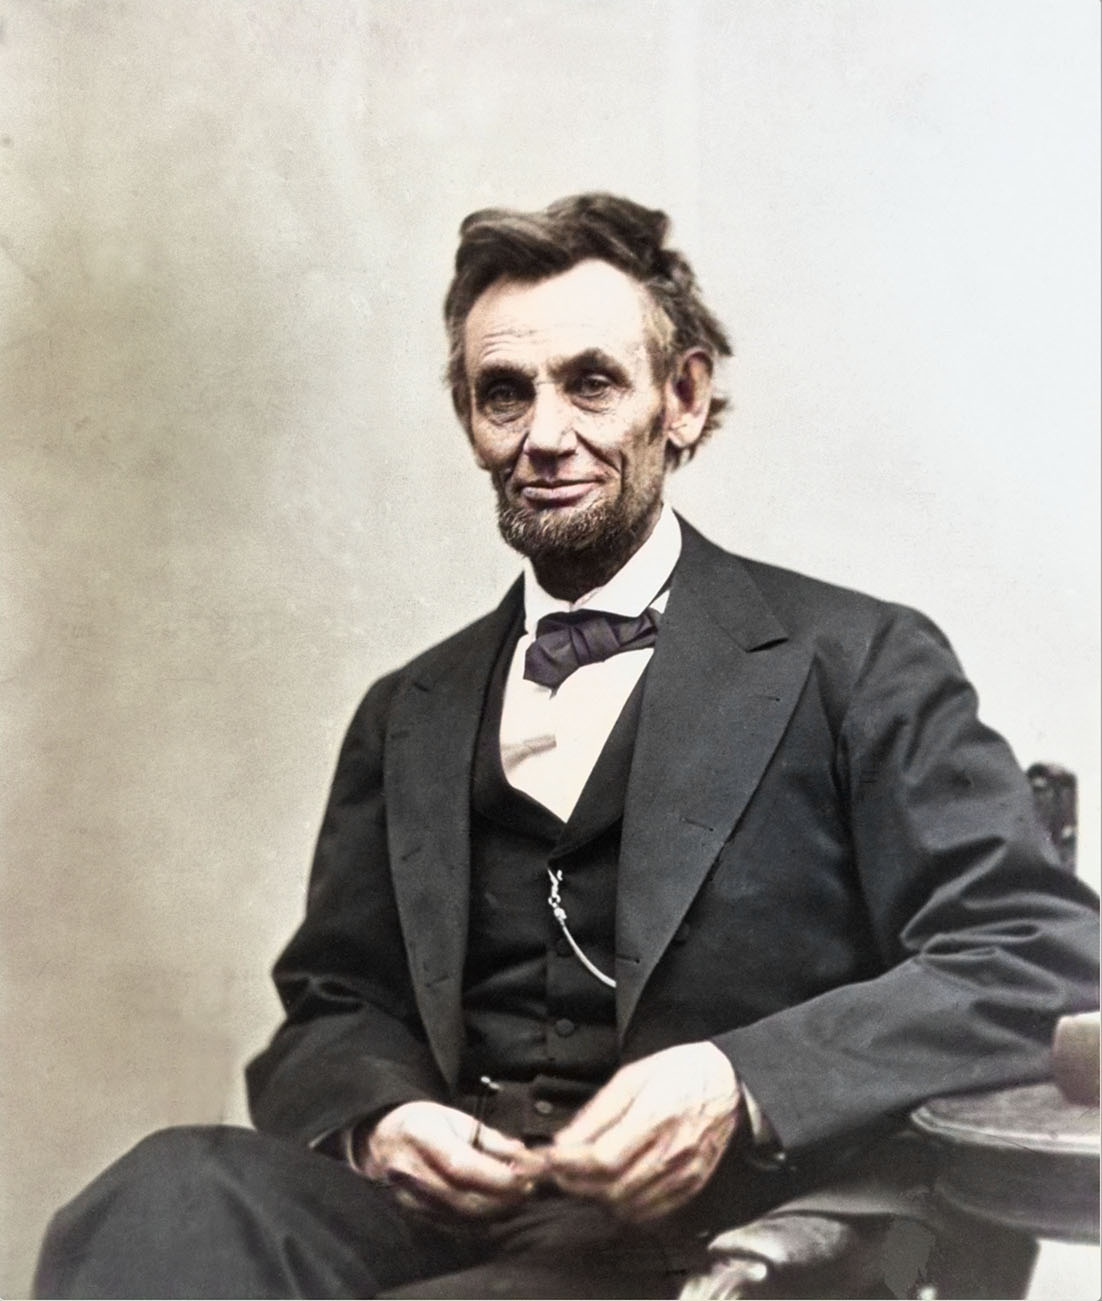 Colorize Filter- Lincoln in color